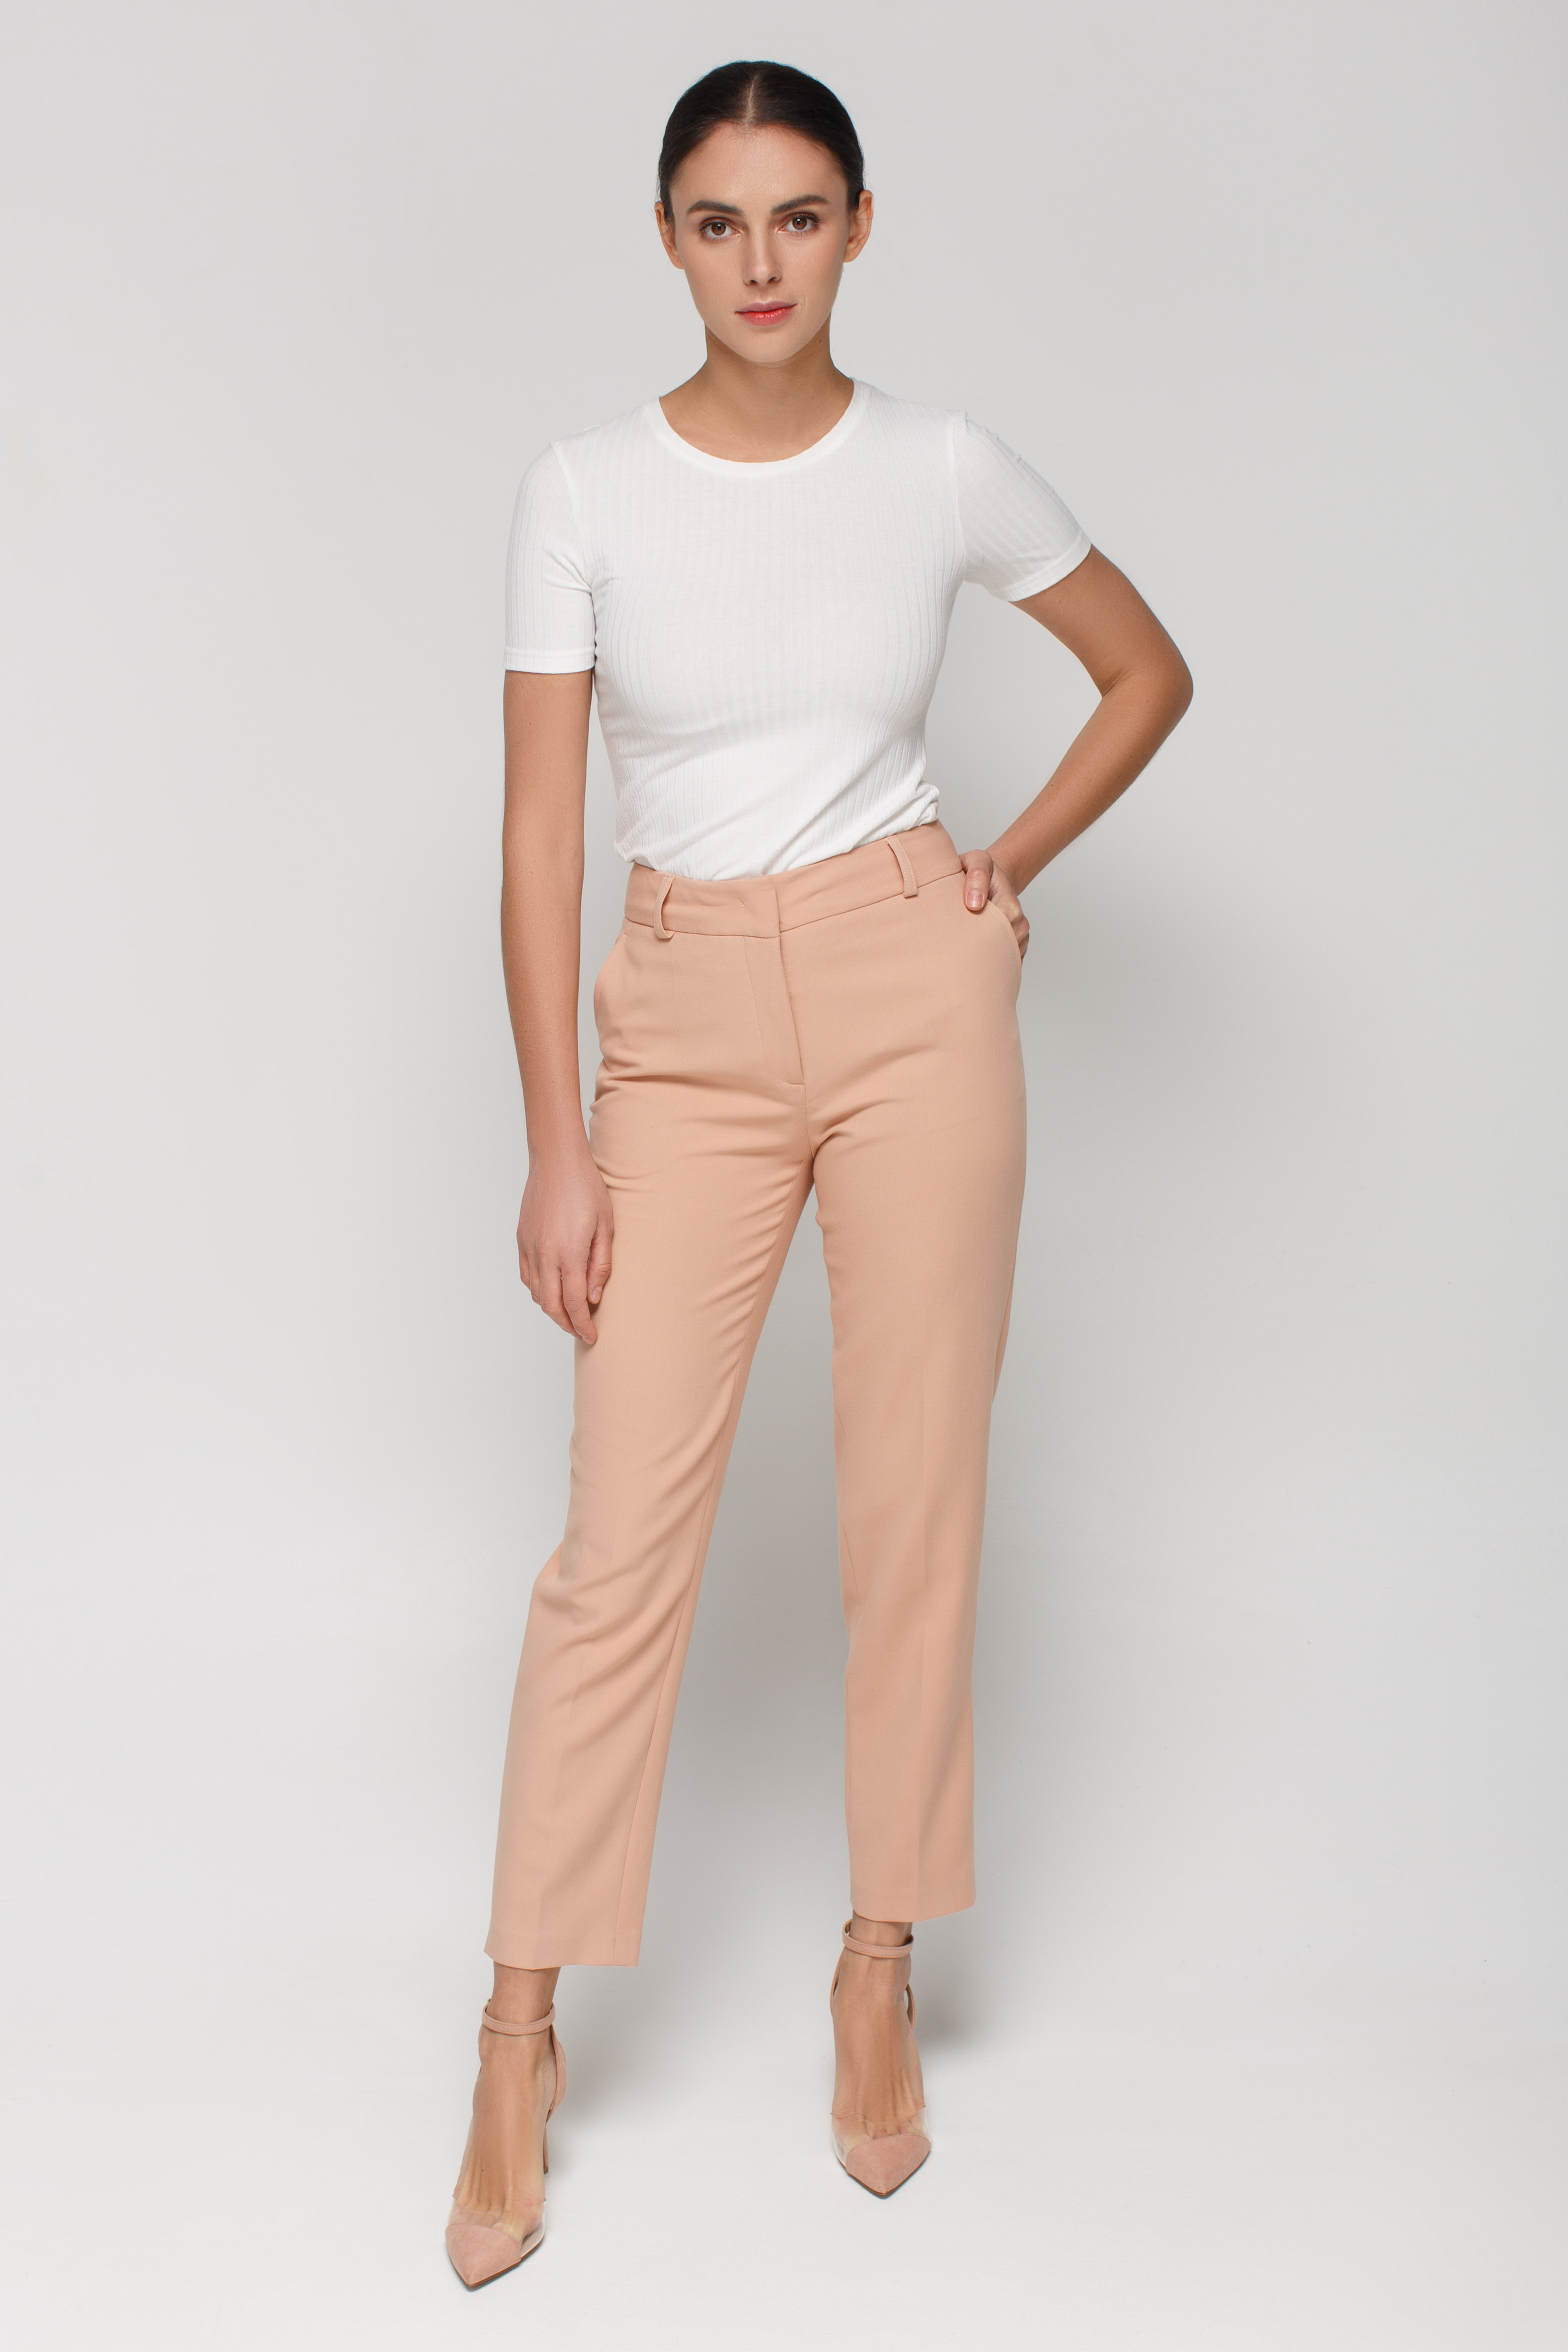 Beige trousers tapered to the bottom, photo 1